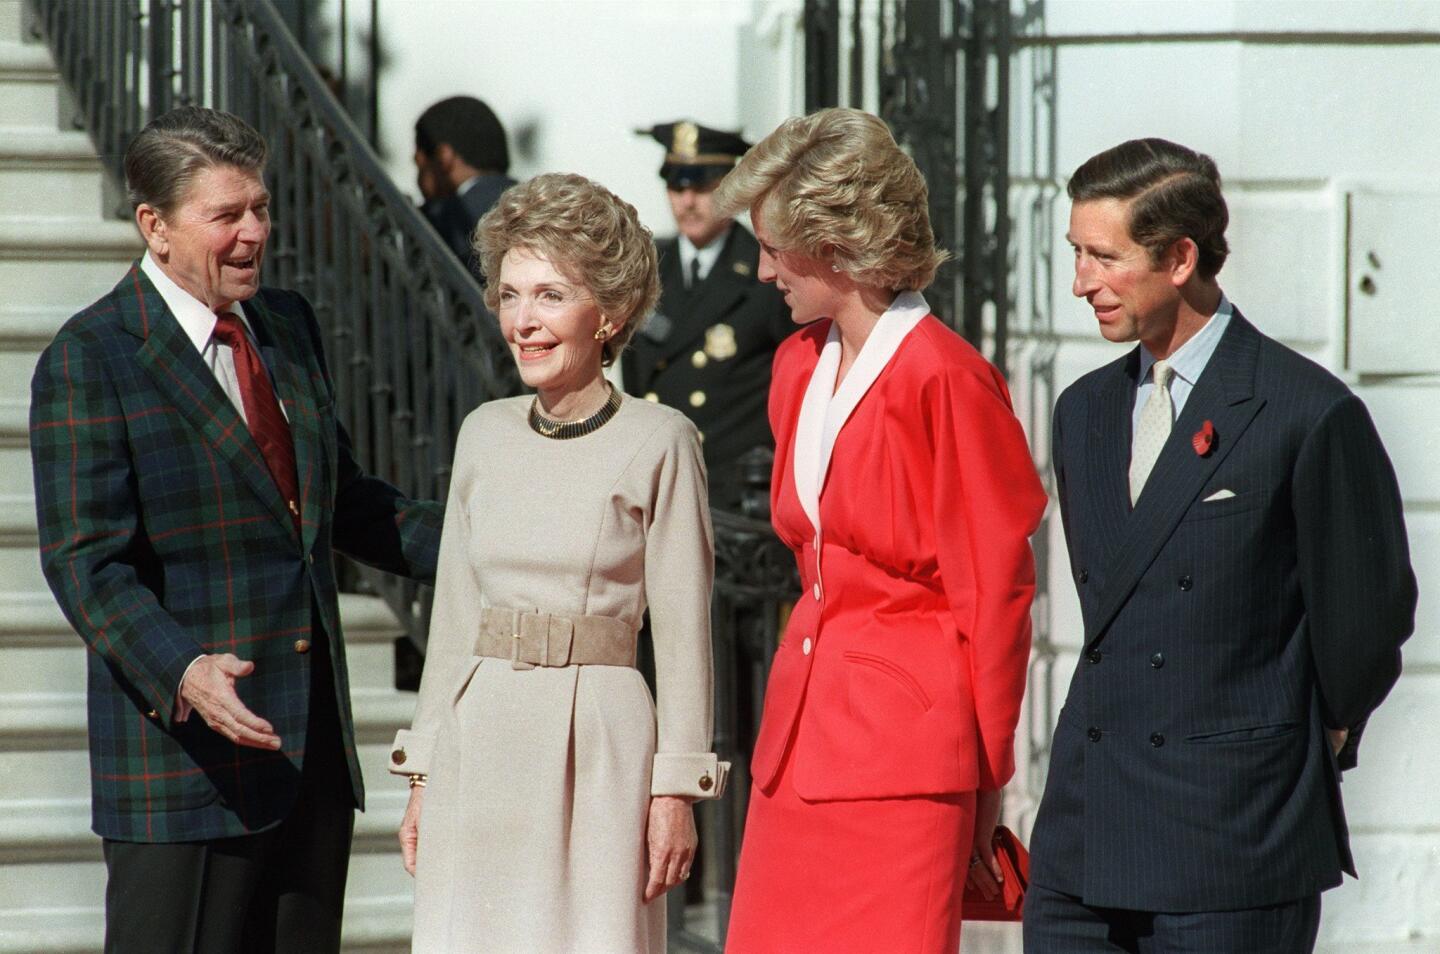 This file photo taken on November 9, 1985 shows (L-R) US President Ronald Reagan and US First Lady Nancy Reagan welcoming to the White House Princess Diana and her husband Prince Charles.